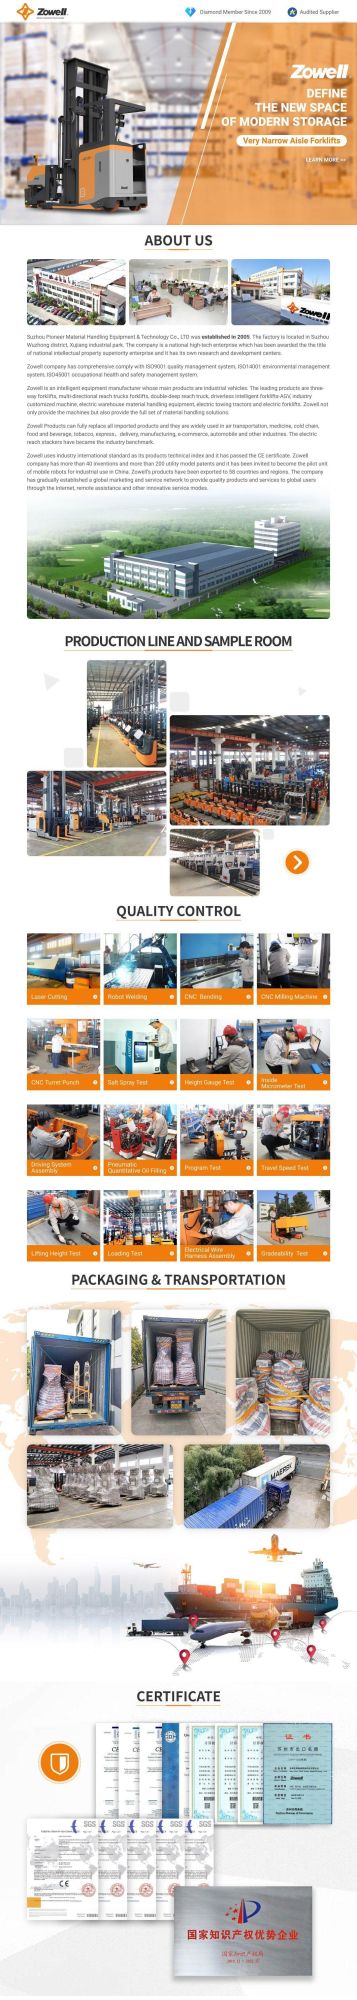 Manufacture 1.2t Standing-Operated Narrow Aisle Truck Three Way Pallet Trucks Man-Down Vna Forklift Vda12